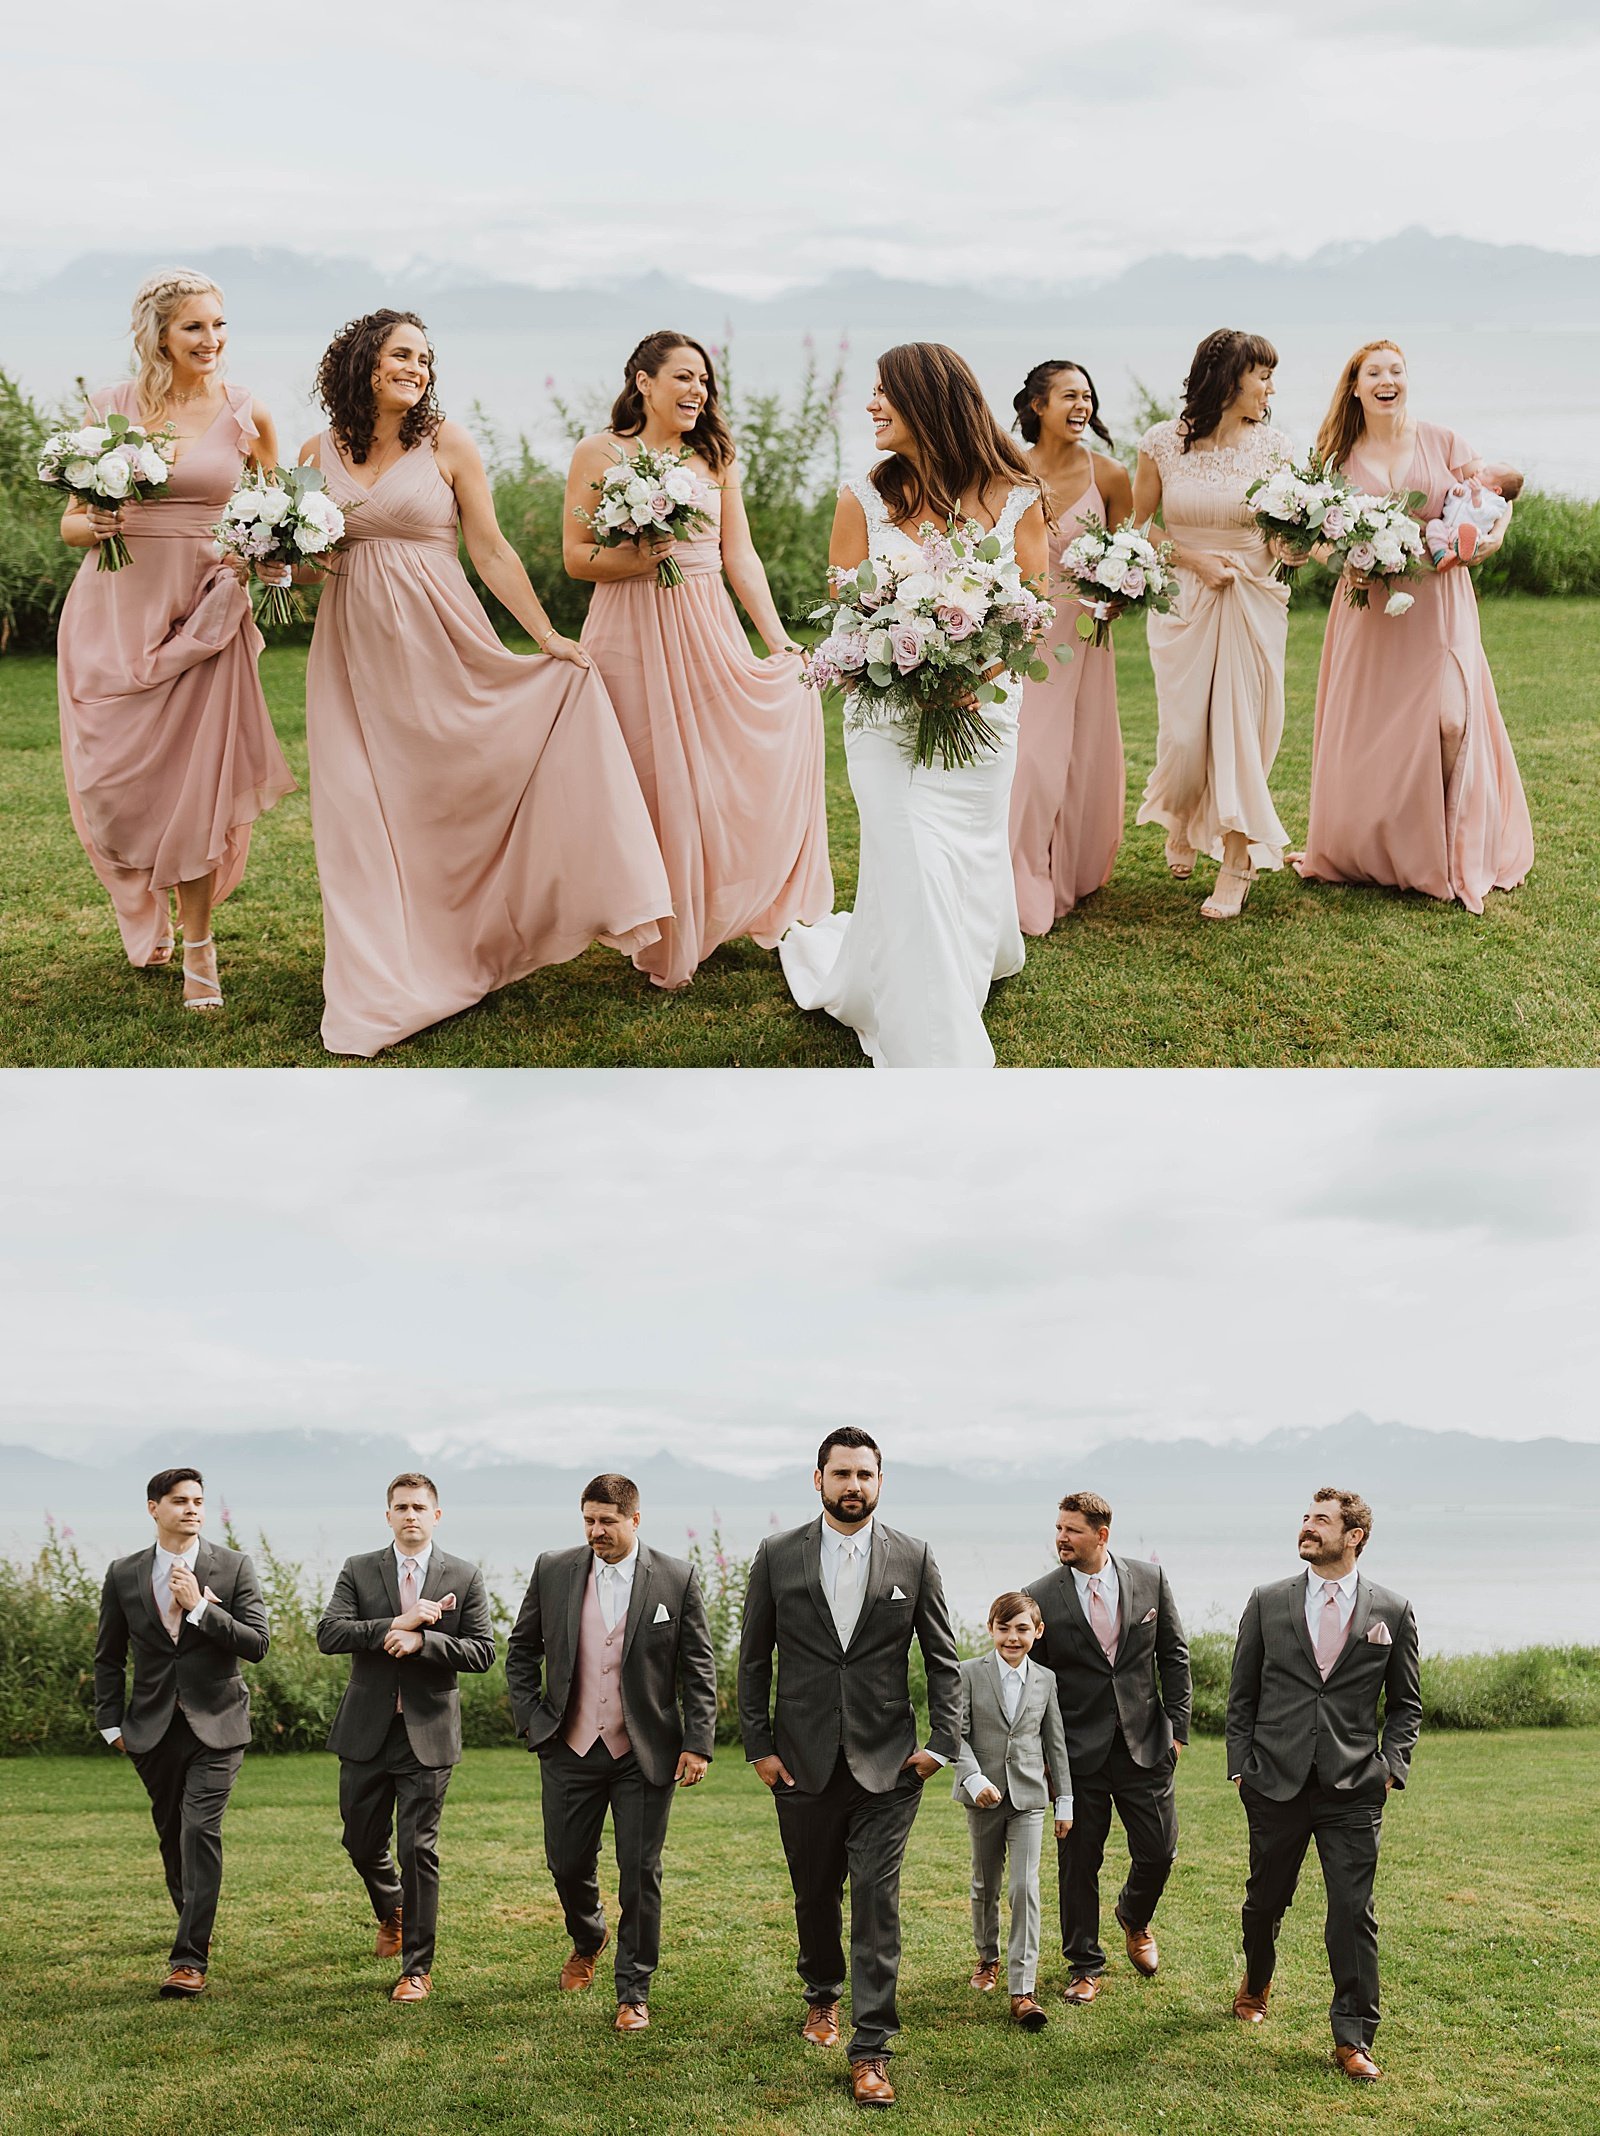  Wedding party walking across a lawn in pink &amp; black colors 